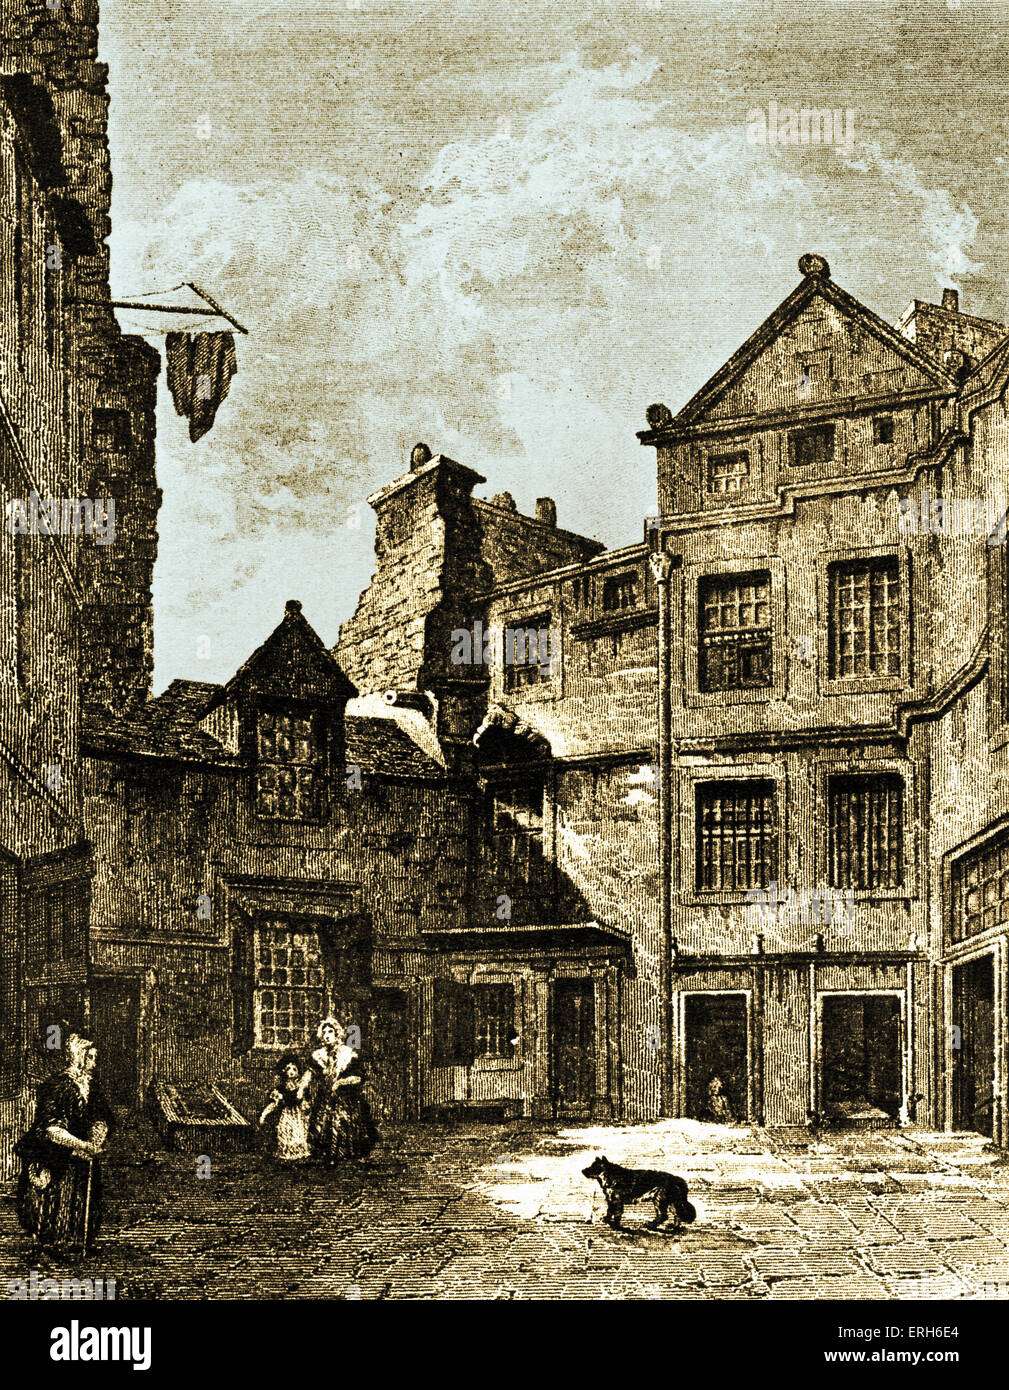 David Hume - Riddle's Close, Edinburgh, where the Scottish philosopher, economist and historian lived for a while. 26 April 1711 - 25 August 1776. Engraving ' Edinburgh in the Olden Times ' (1848) by Daniel Wilson Stock Photo